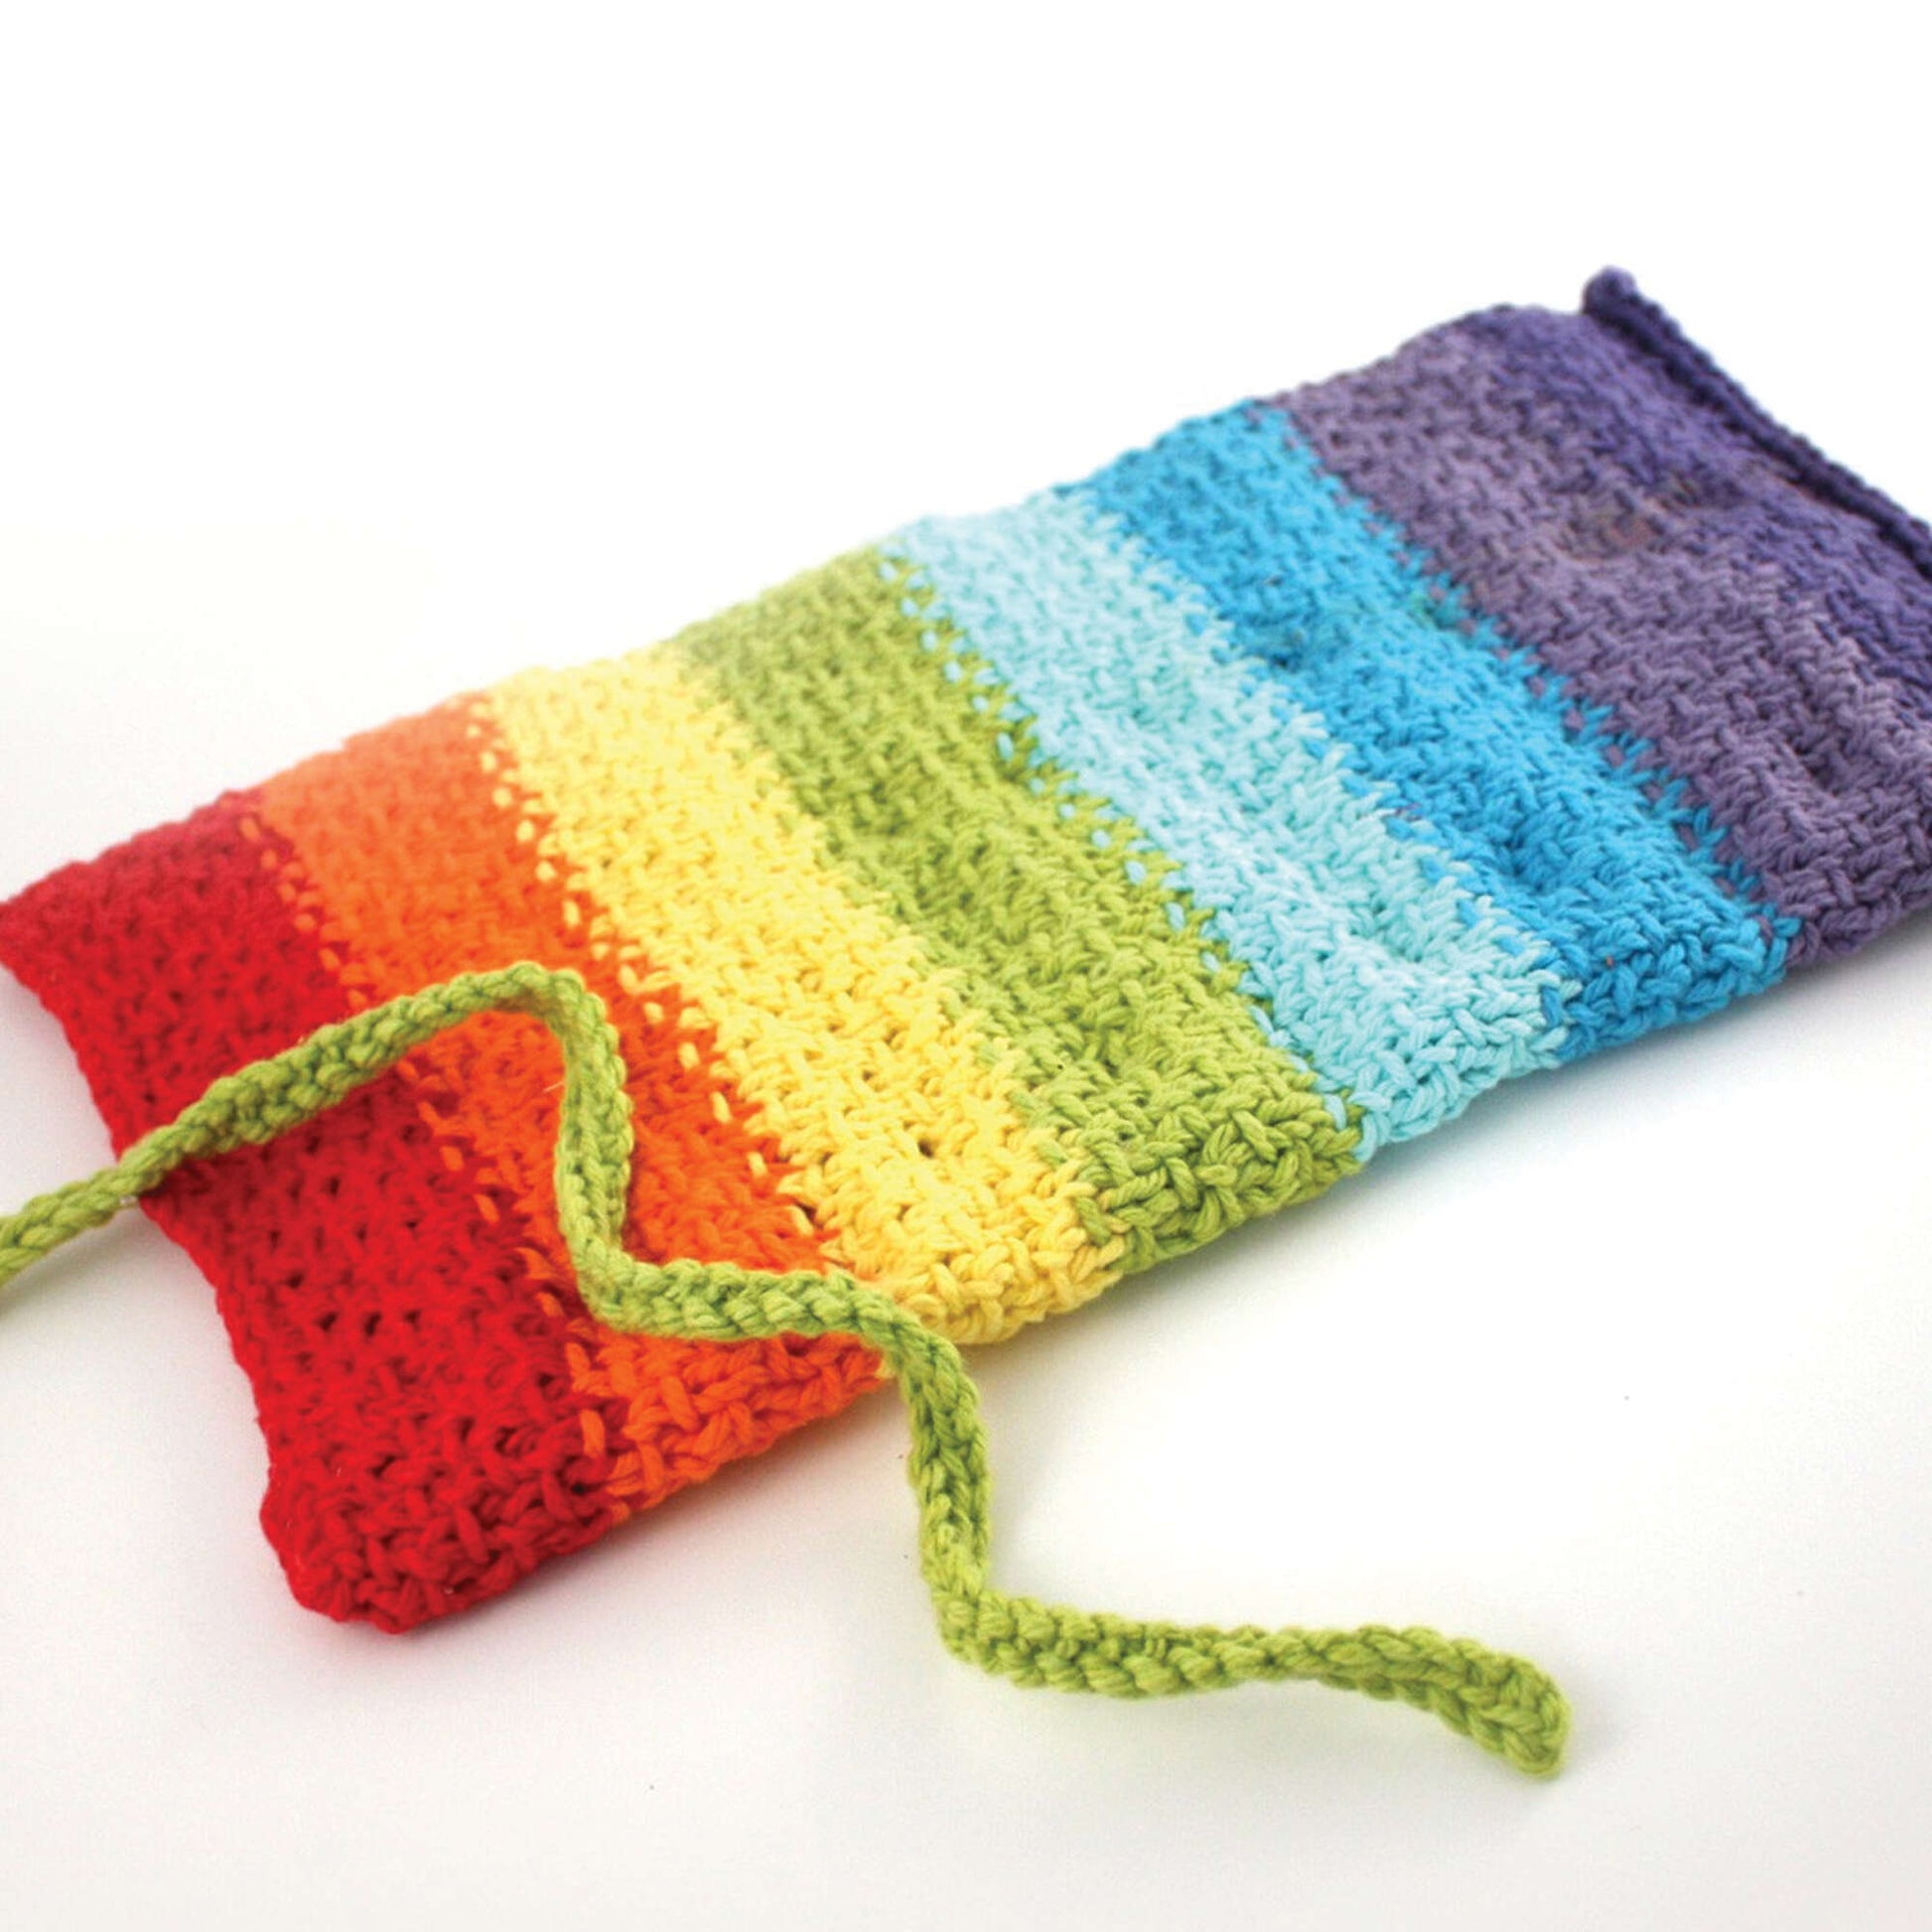 Knit Pencil Case with buttons - a beginning knit tutorial